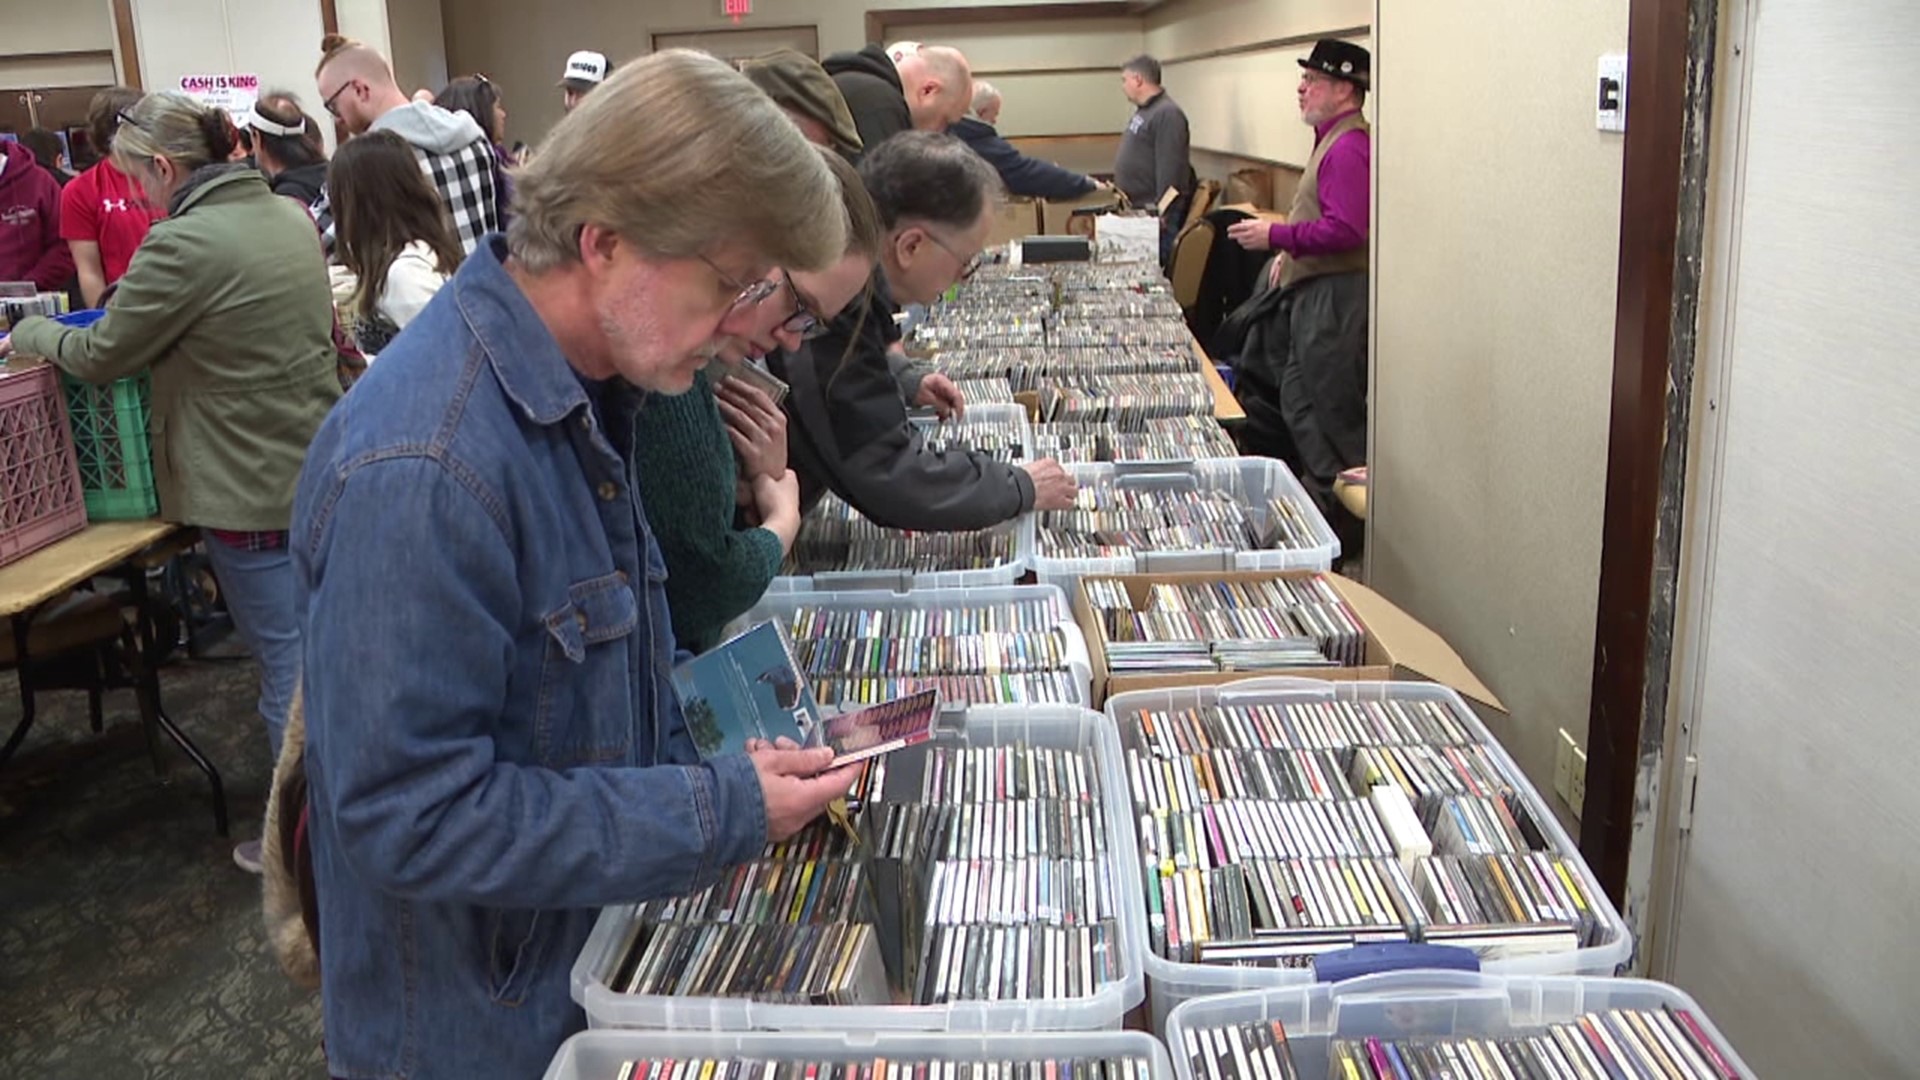 The NEPA Scranton/Wilkes-Barre LP Vinyl Record and Cd Show returned to the Woodlands Sunday.